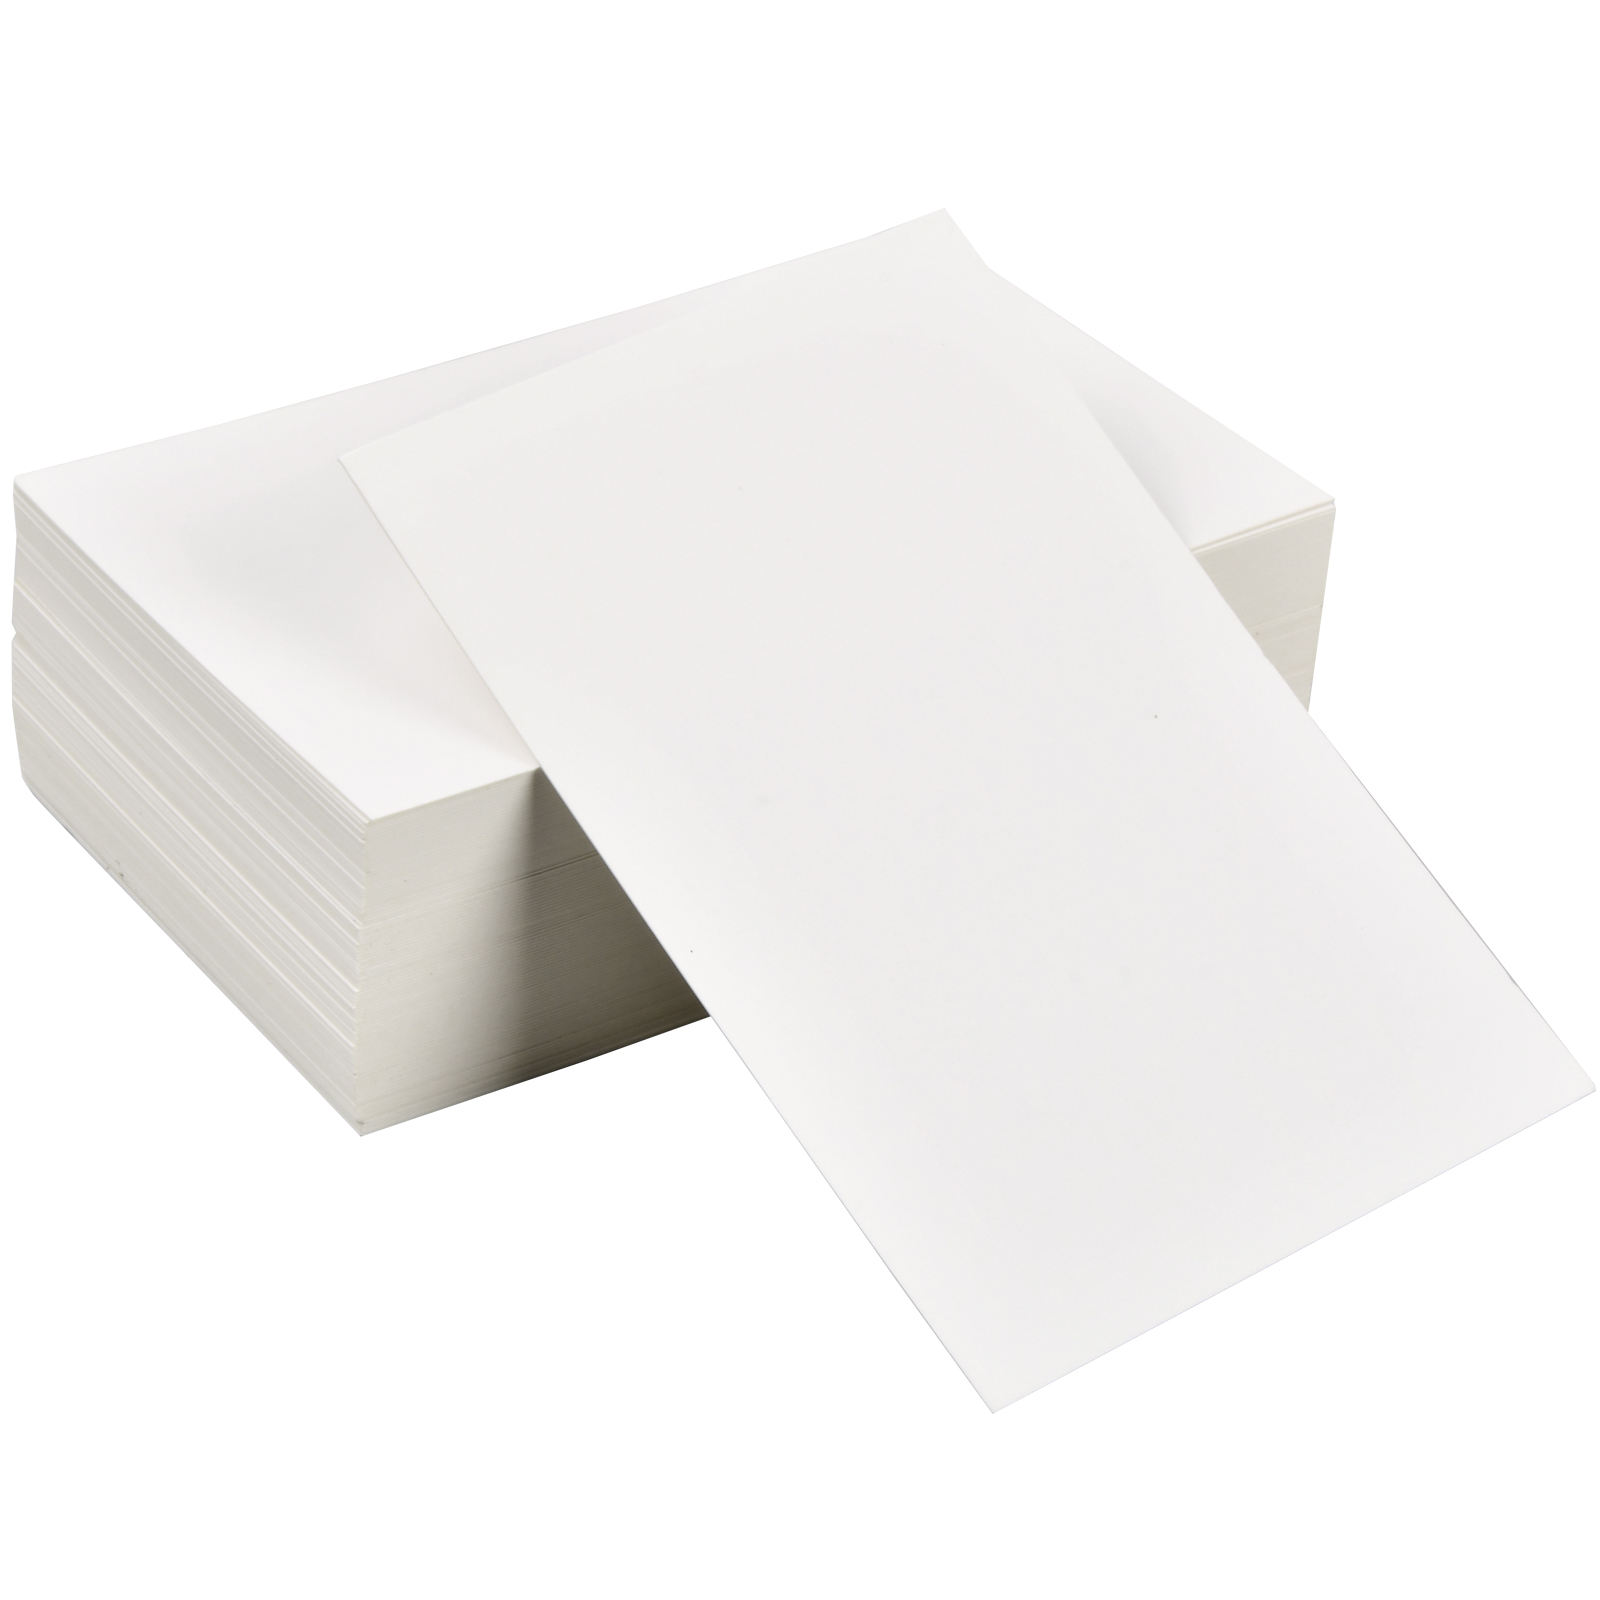 50 Sheets Watercolor Paper Bulk, 200gsm, 3.93x3.93 Inches